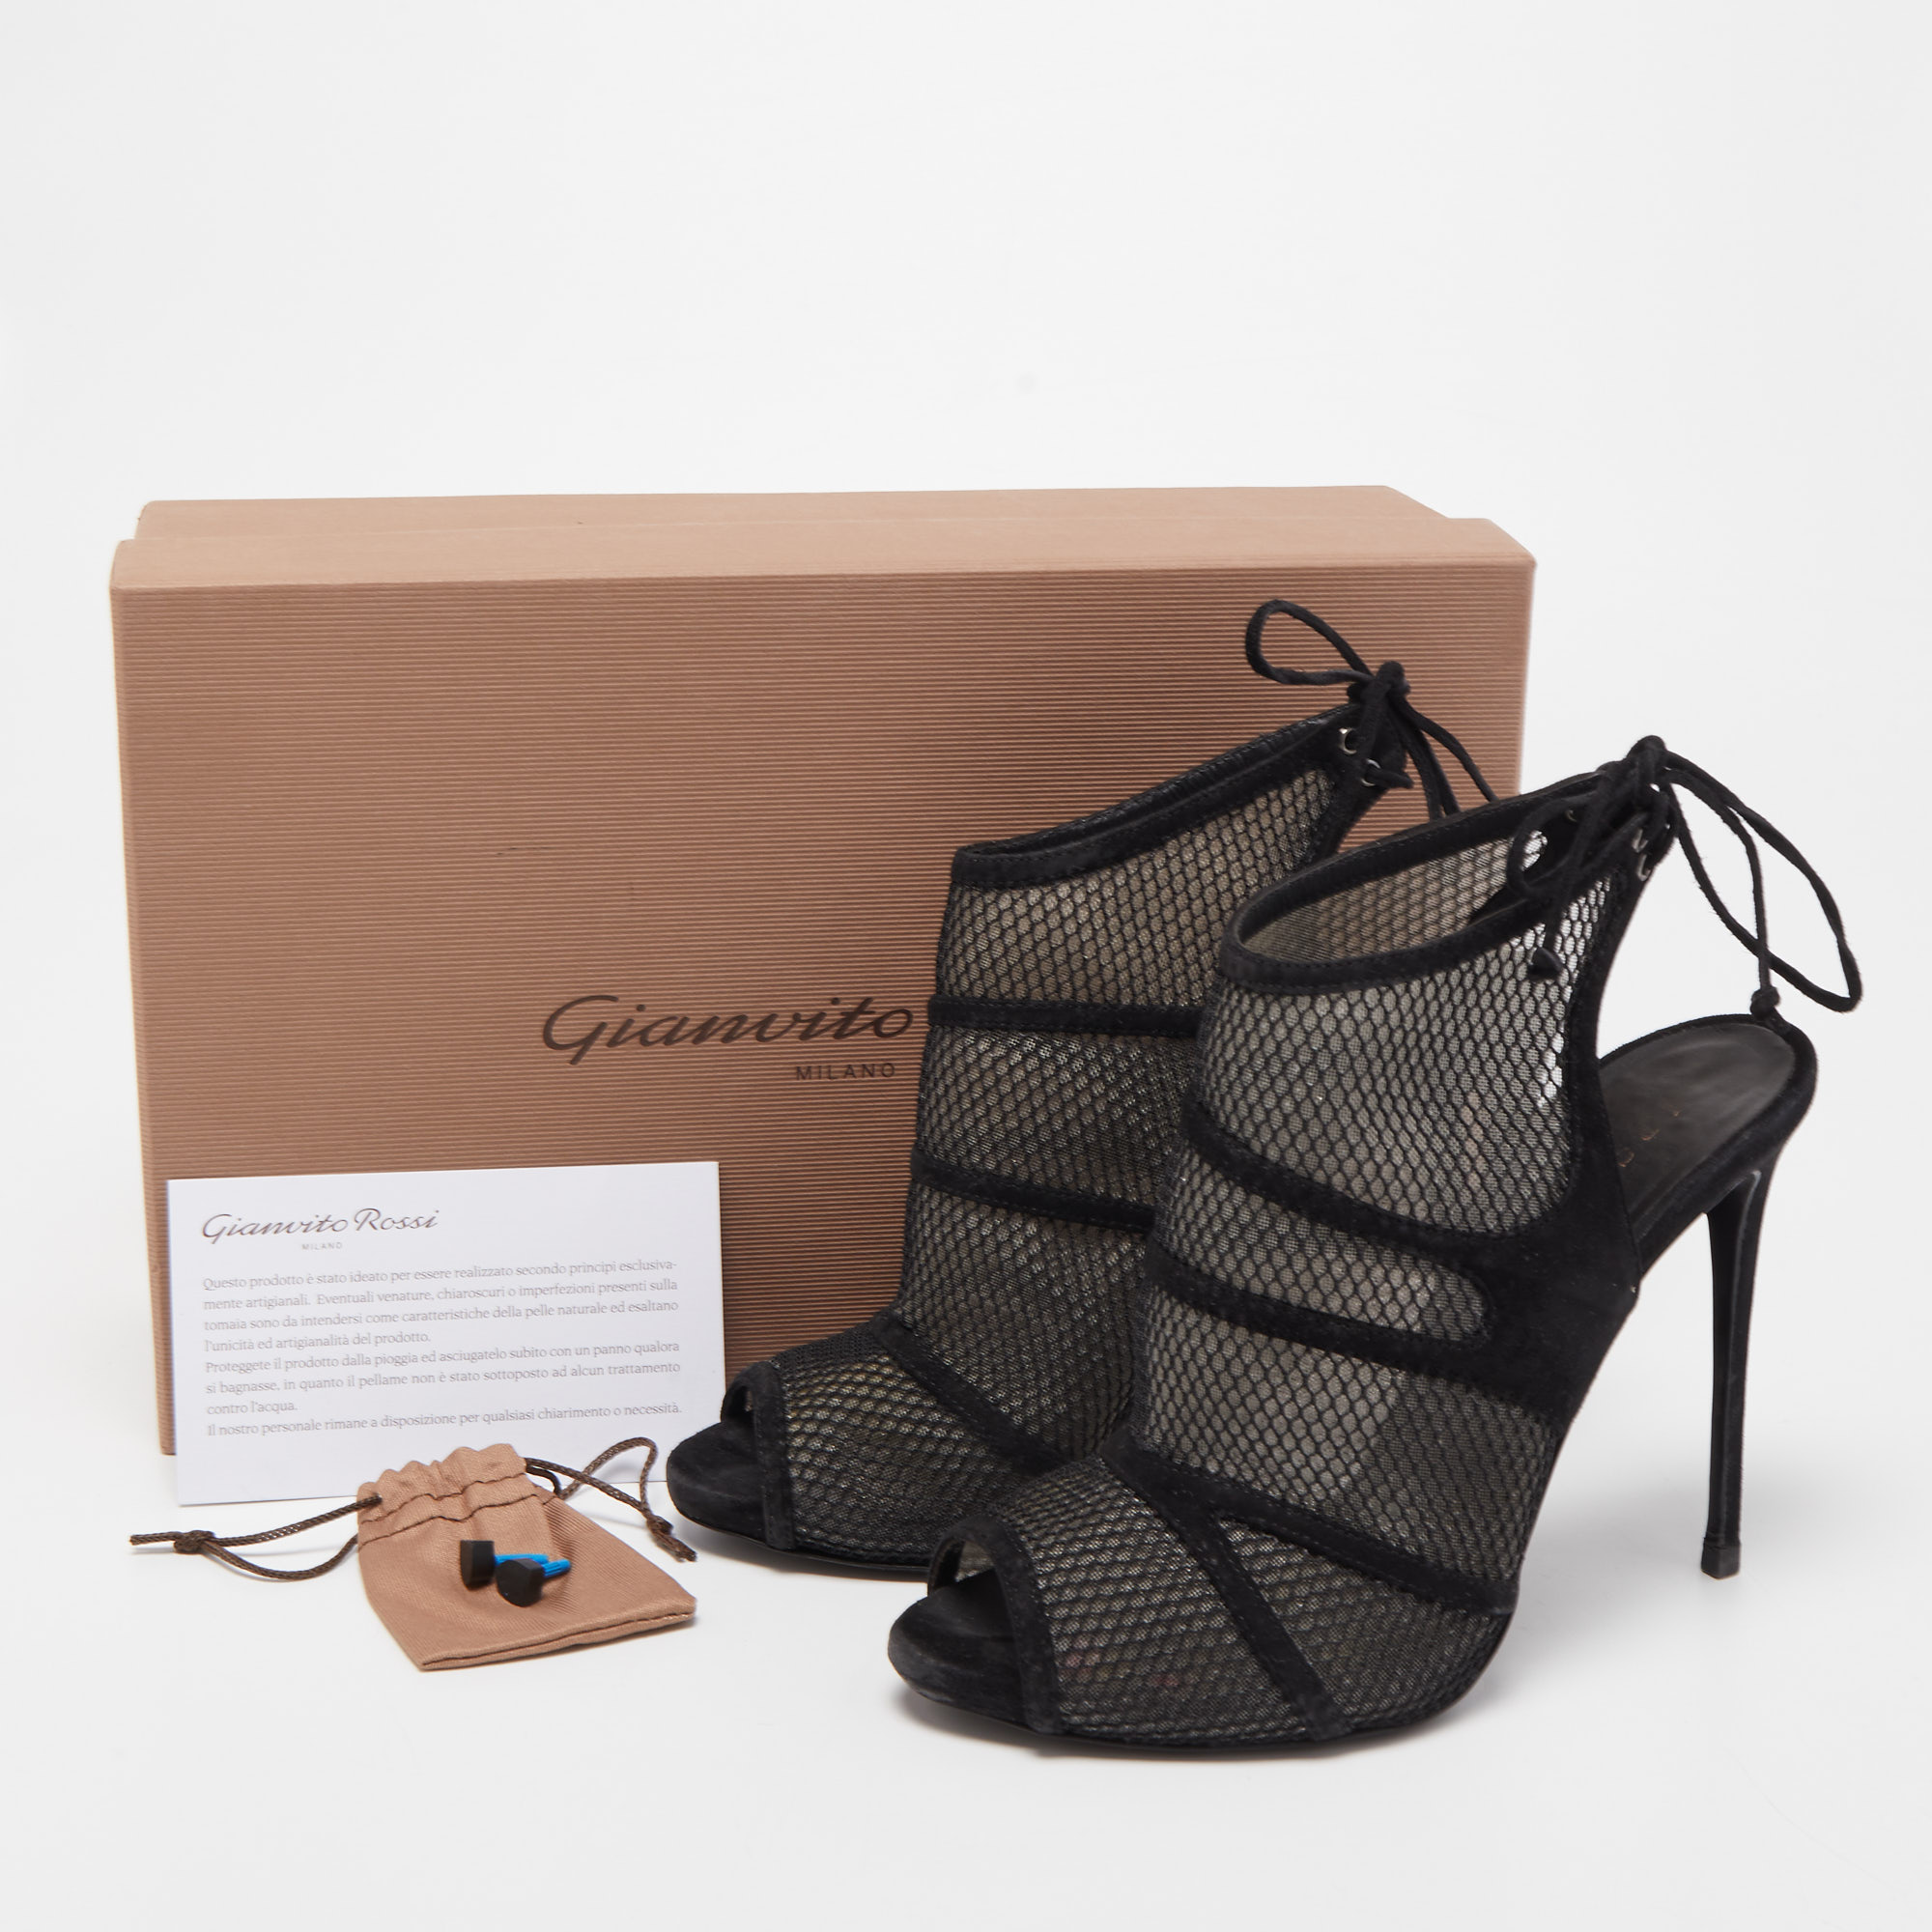 Gianvito Rossi Black Suede And Mesh Peep Toe Ankle Sandals Size 37.5